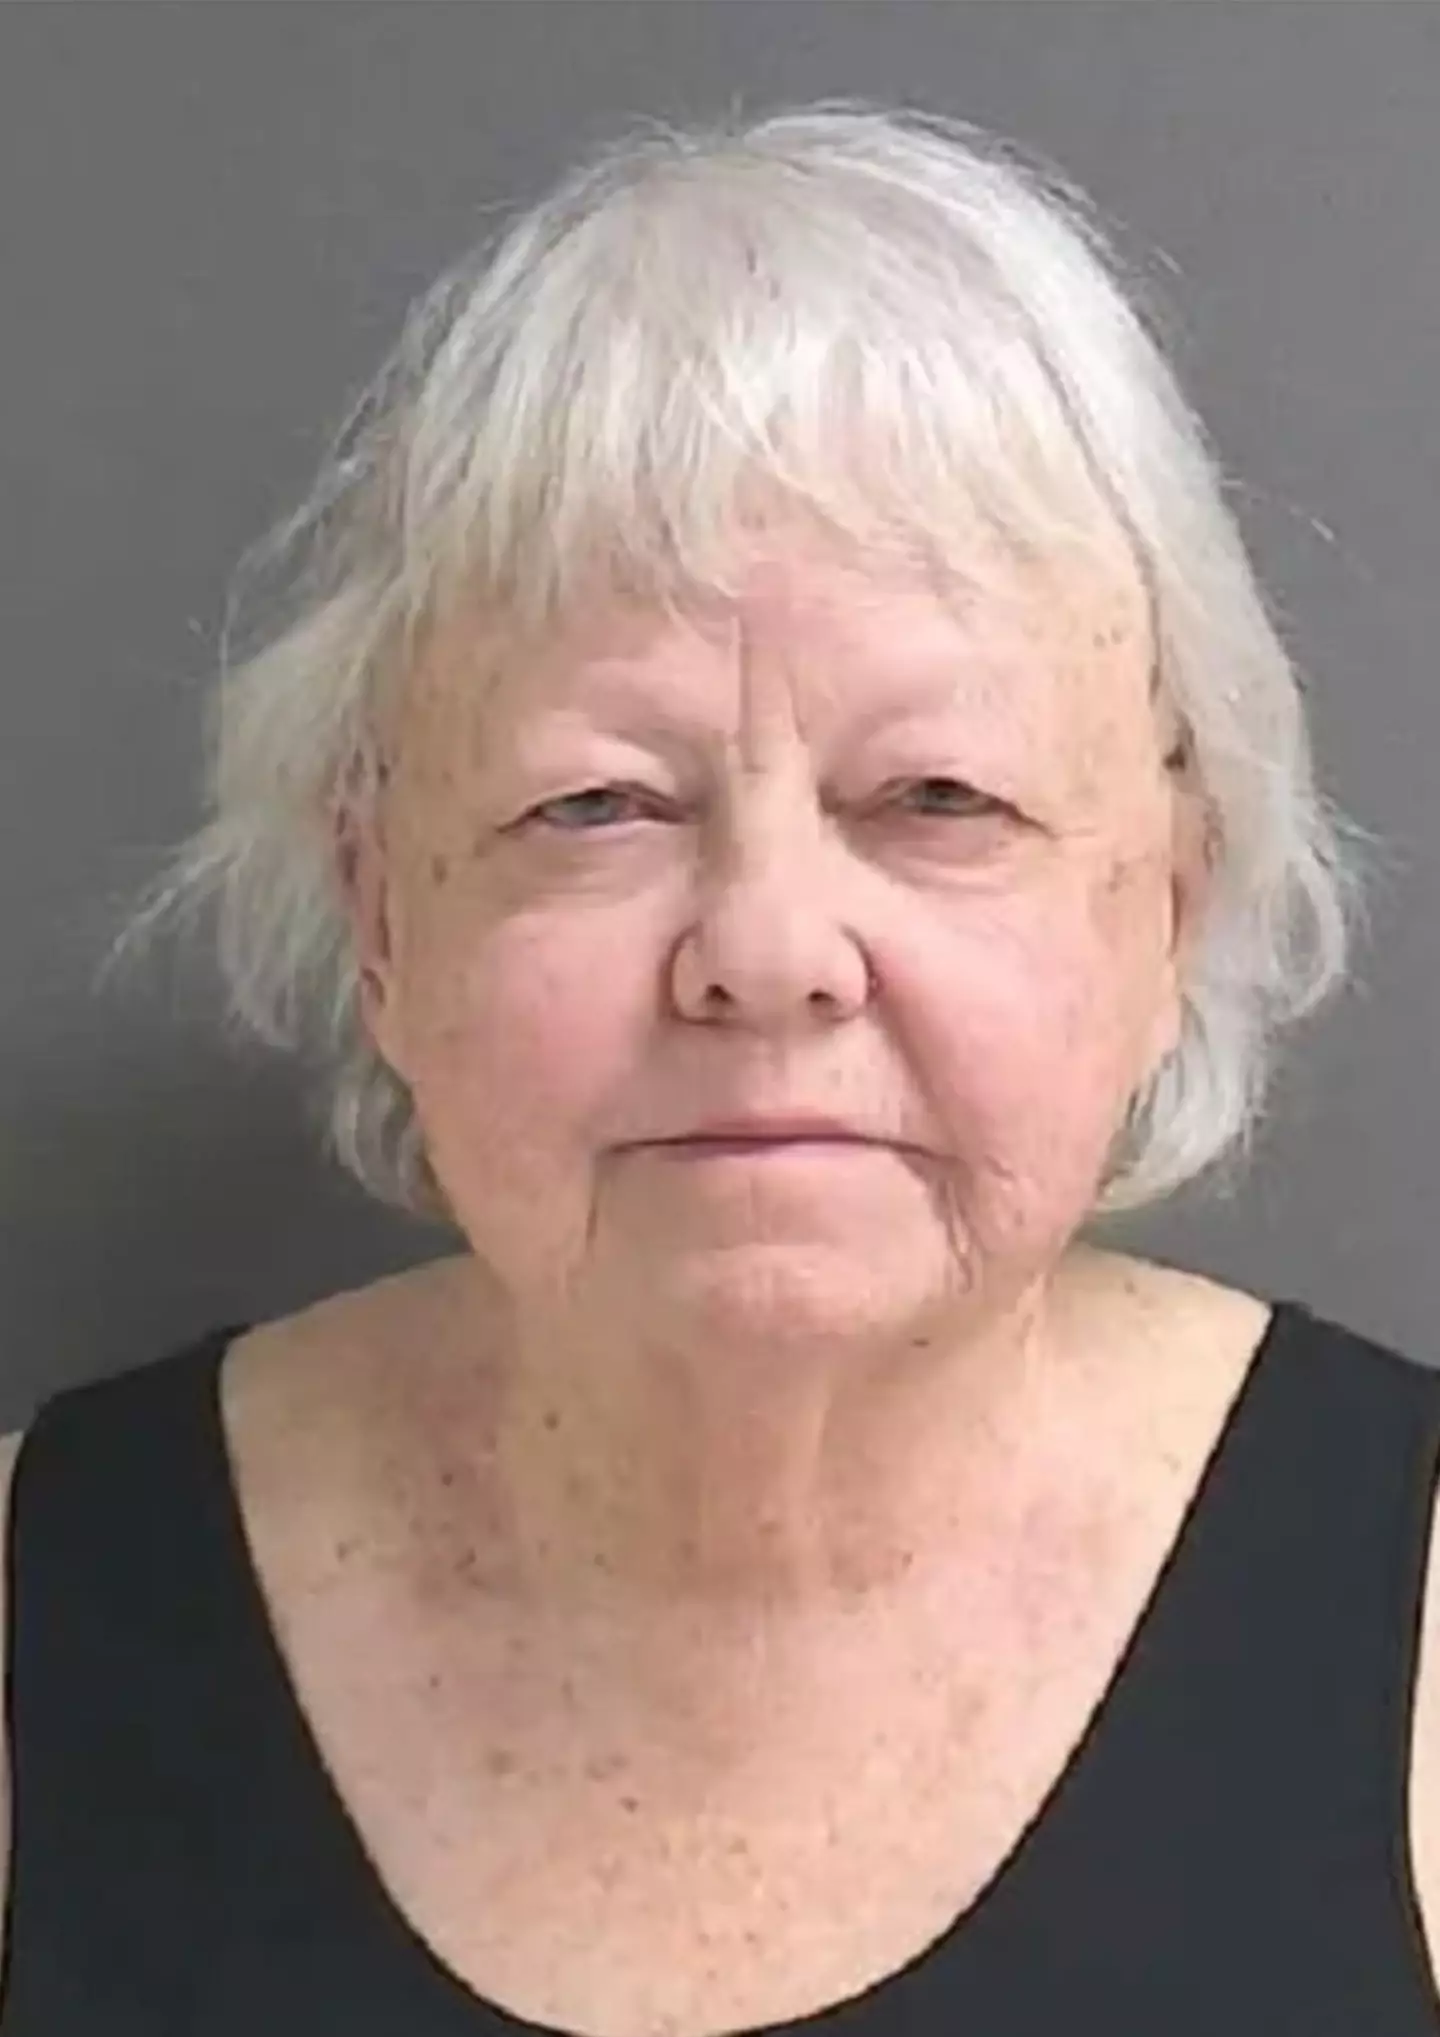 Ellen Gilland has been charged with first-degree murder.